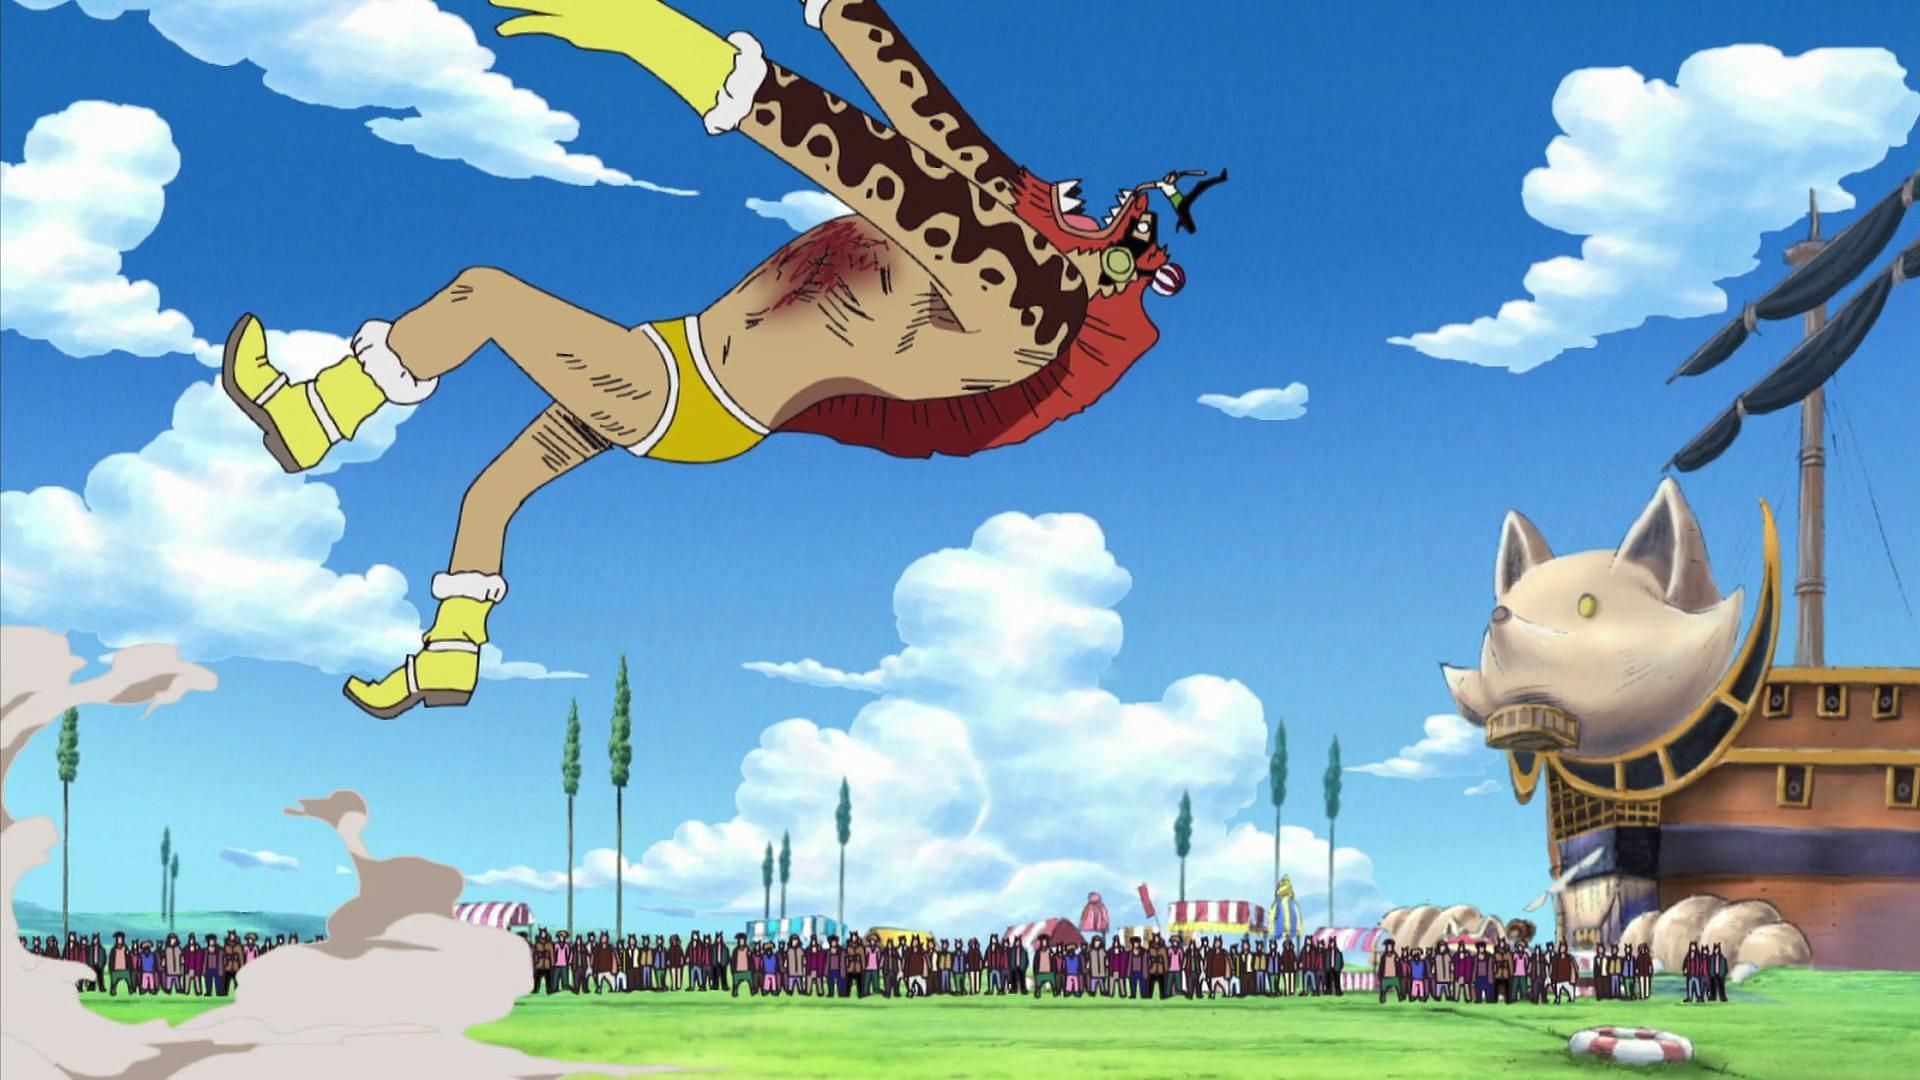 Big Pan during the Davy Back Fight (Image via Toei Animation, One Piece)